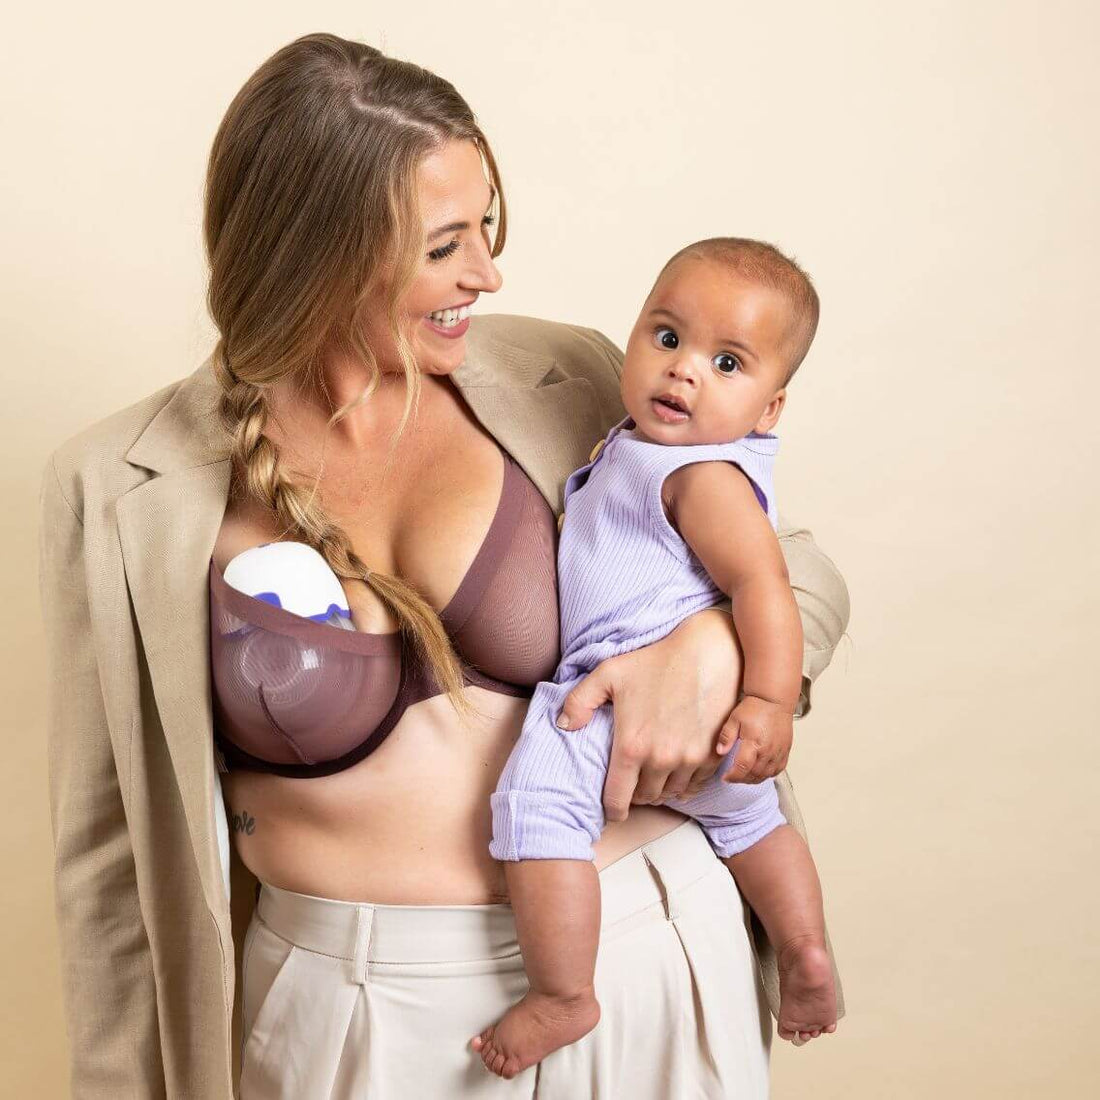 Motif Medical - New & Improved Duo - Portable Double Electric Breast Pump,  Easy, On-The-Go Pumping, Ideal for Travel Moms